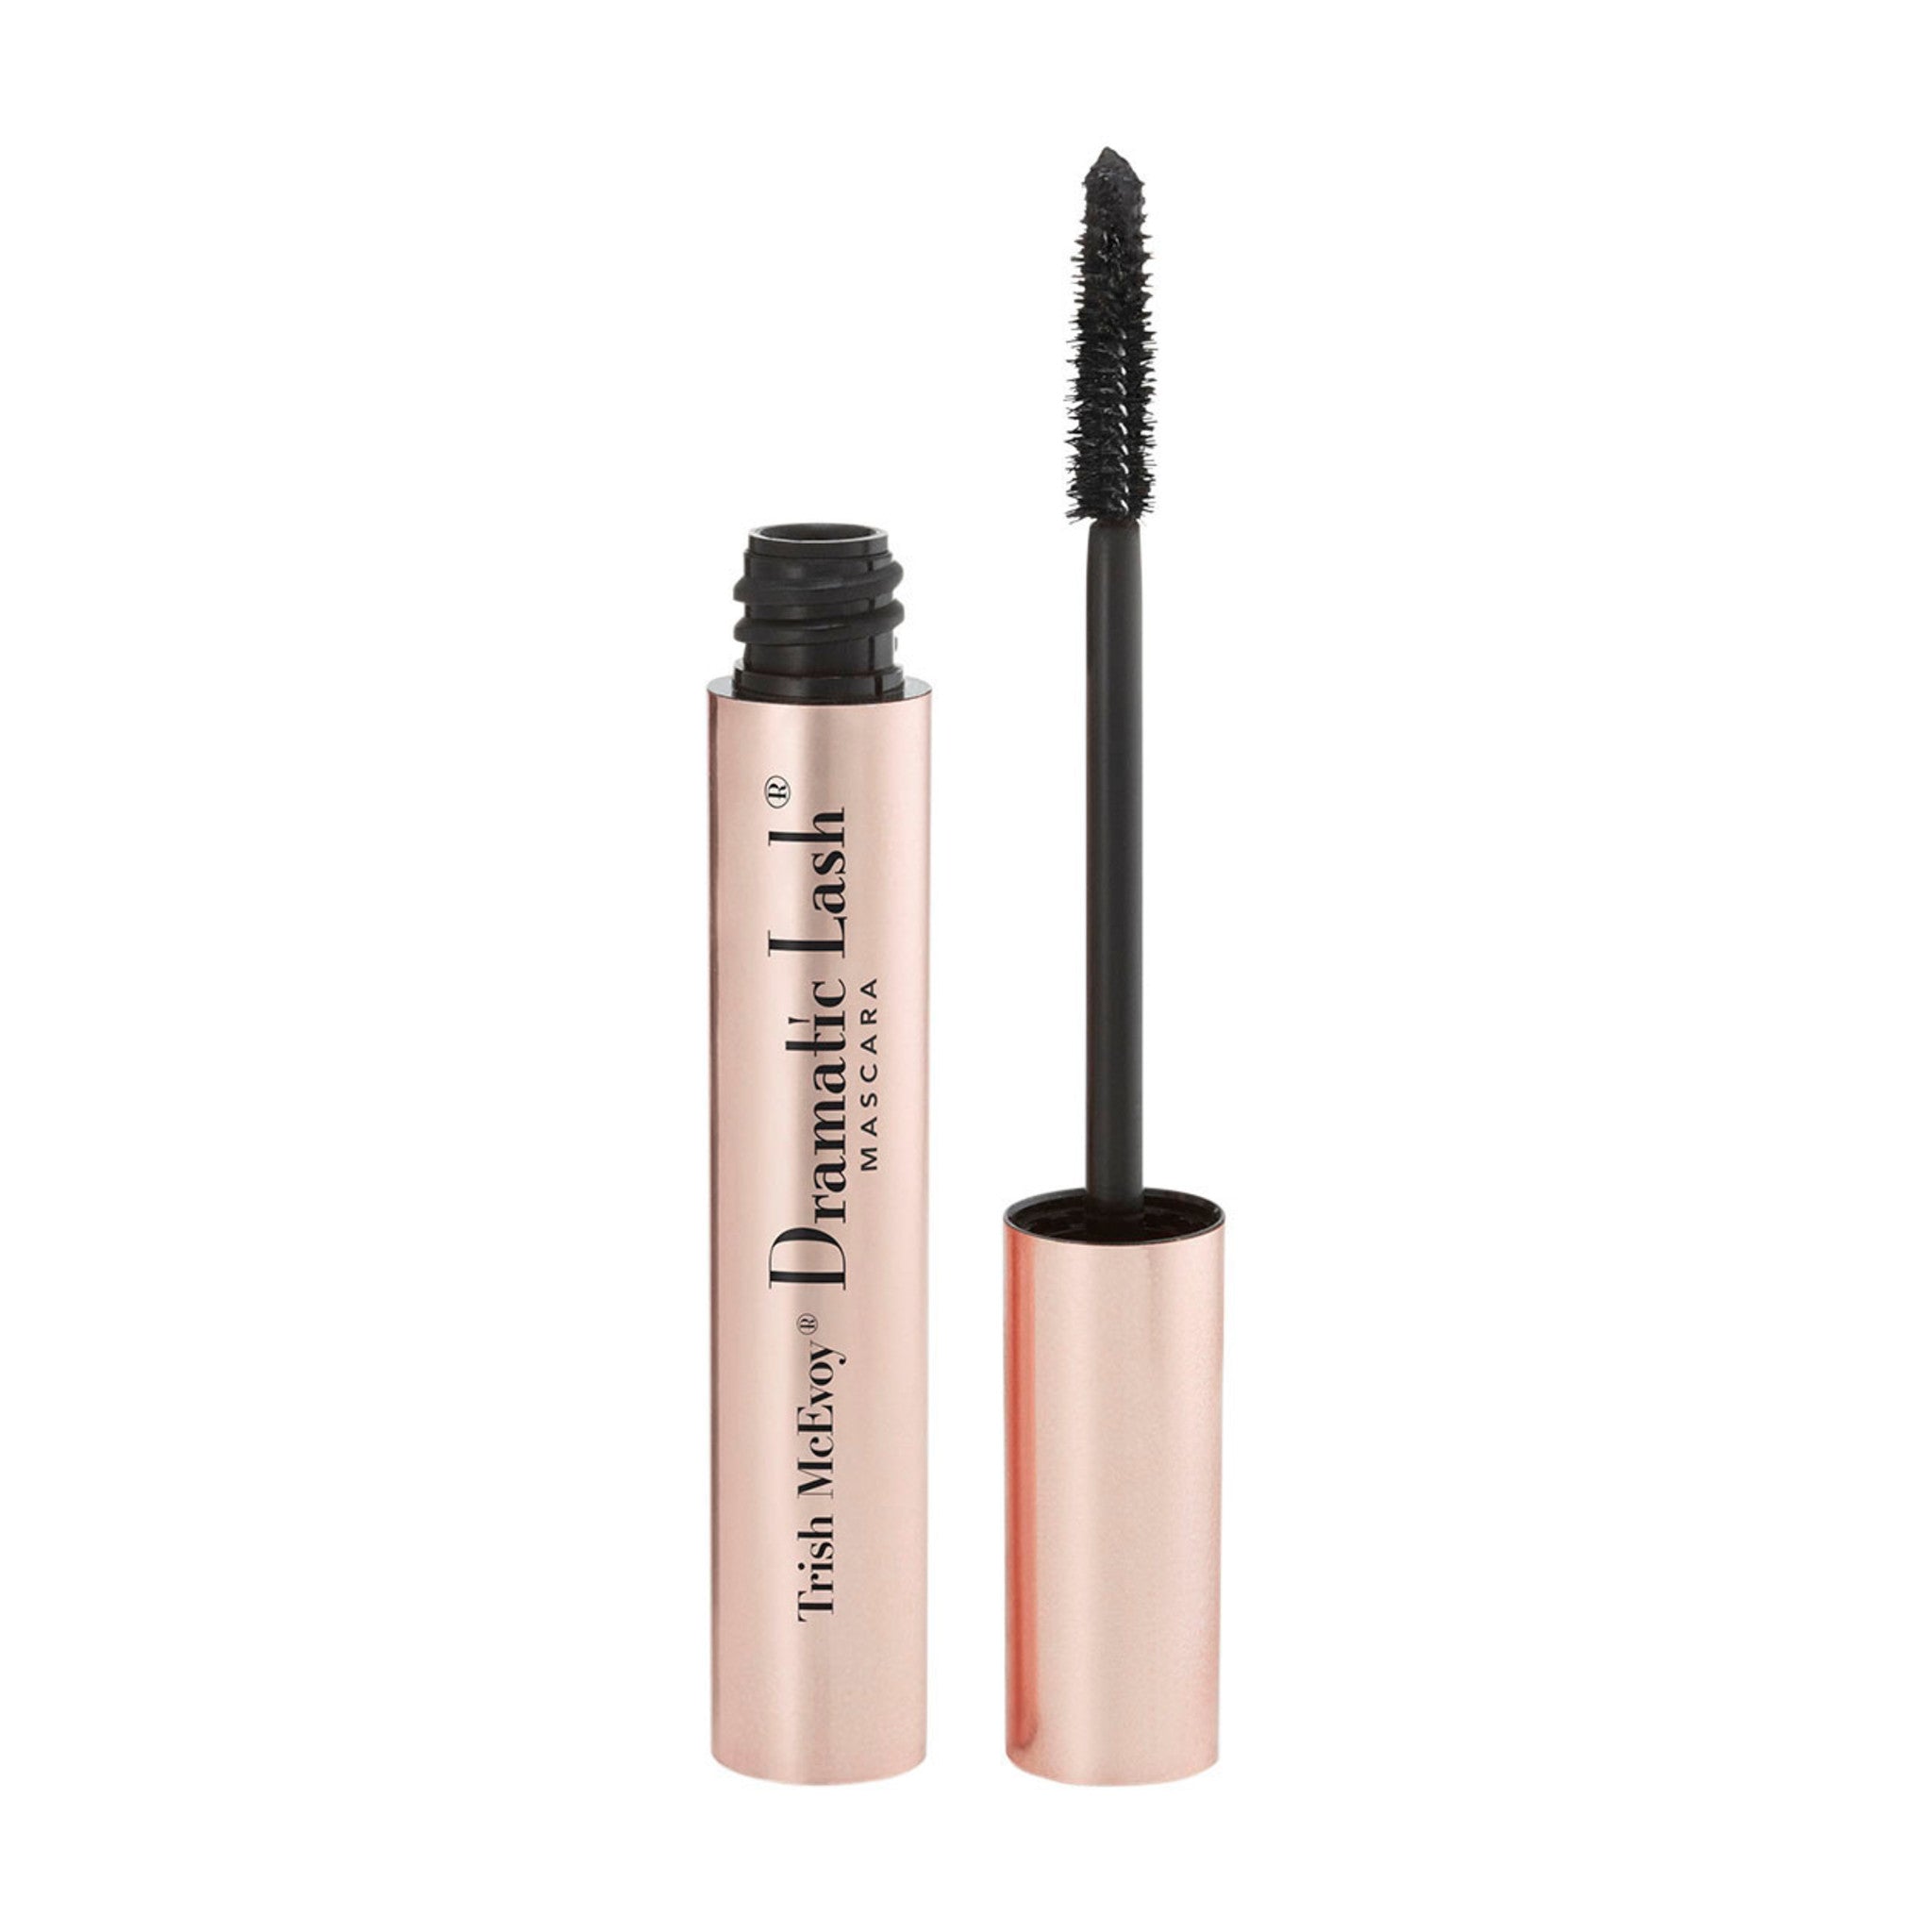 Trish McEvoy Dramatic Lash Mascara main image. This product is in the color black